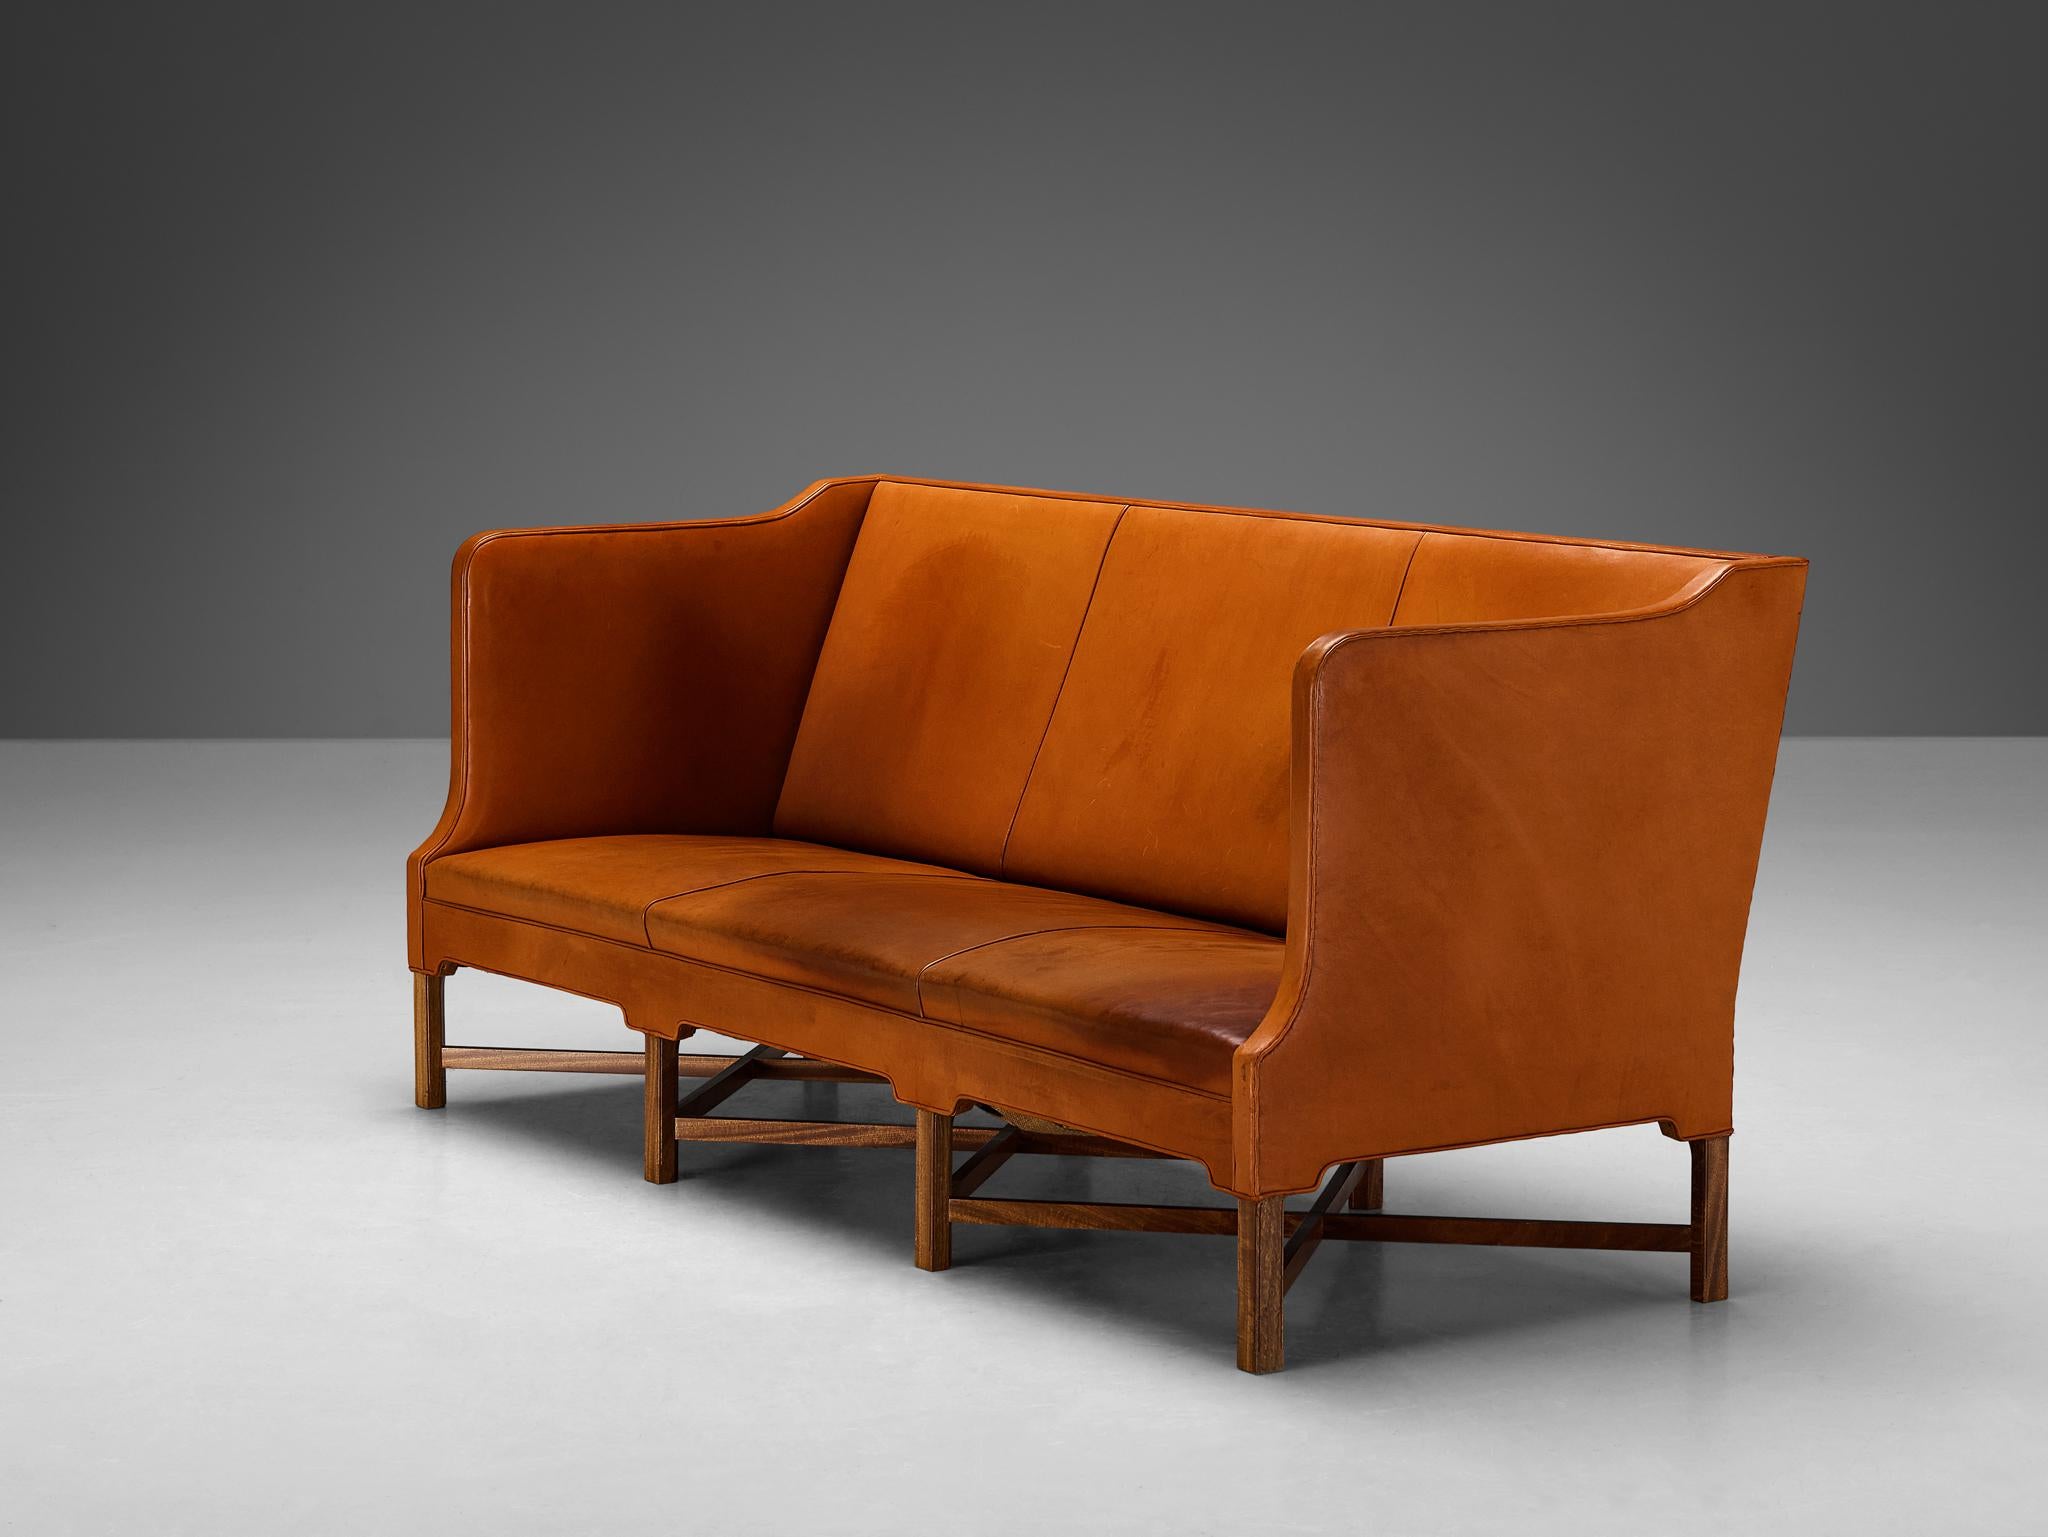 Mid-20th Century Kaare Klint for Rud. Rasmussen Sofa Model 4118 in Leather and Mahogany  For Sale